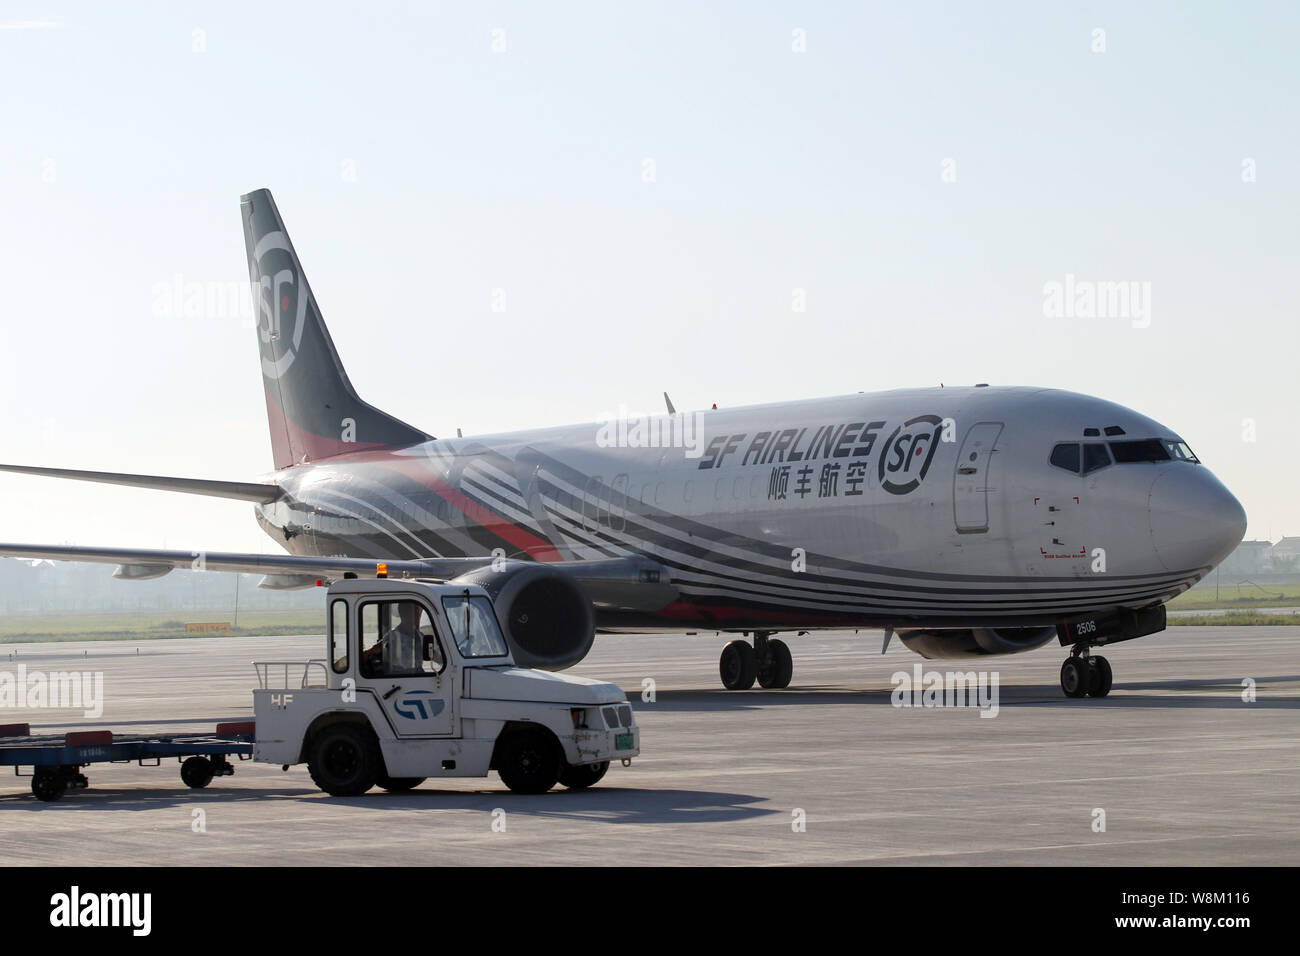 --FILE--A Boeing 737-400 cargo jet of SF Airlines taxis at the Nantong Xingdong Airport in Nantong city, east China's Jiangsu province, 4 September 20 Stock Photo